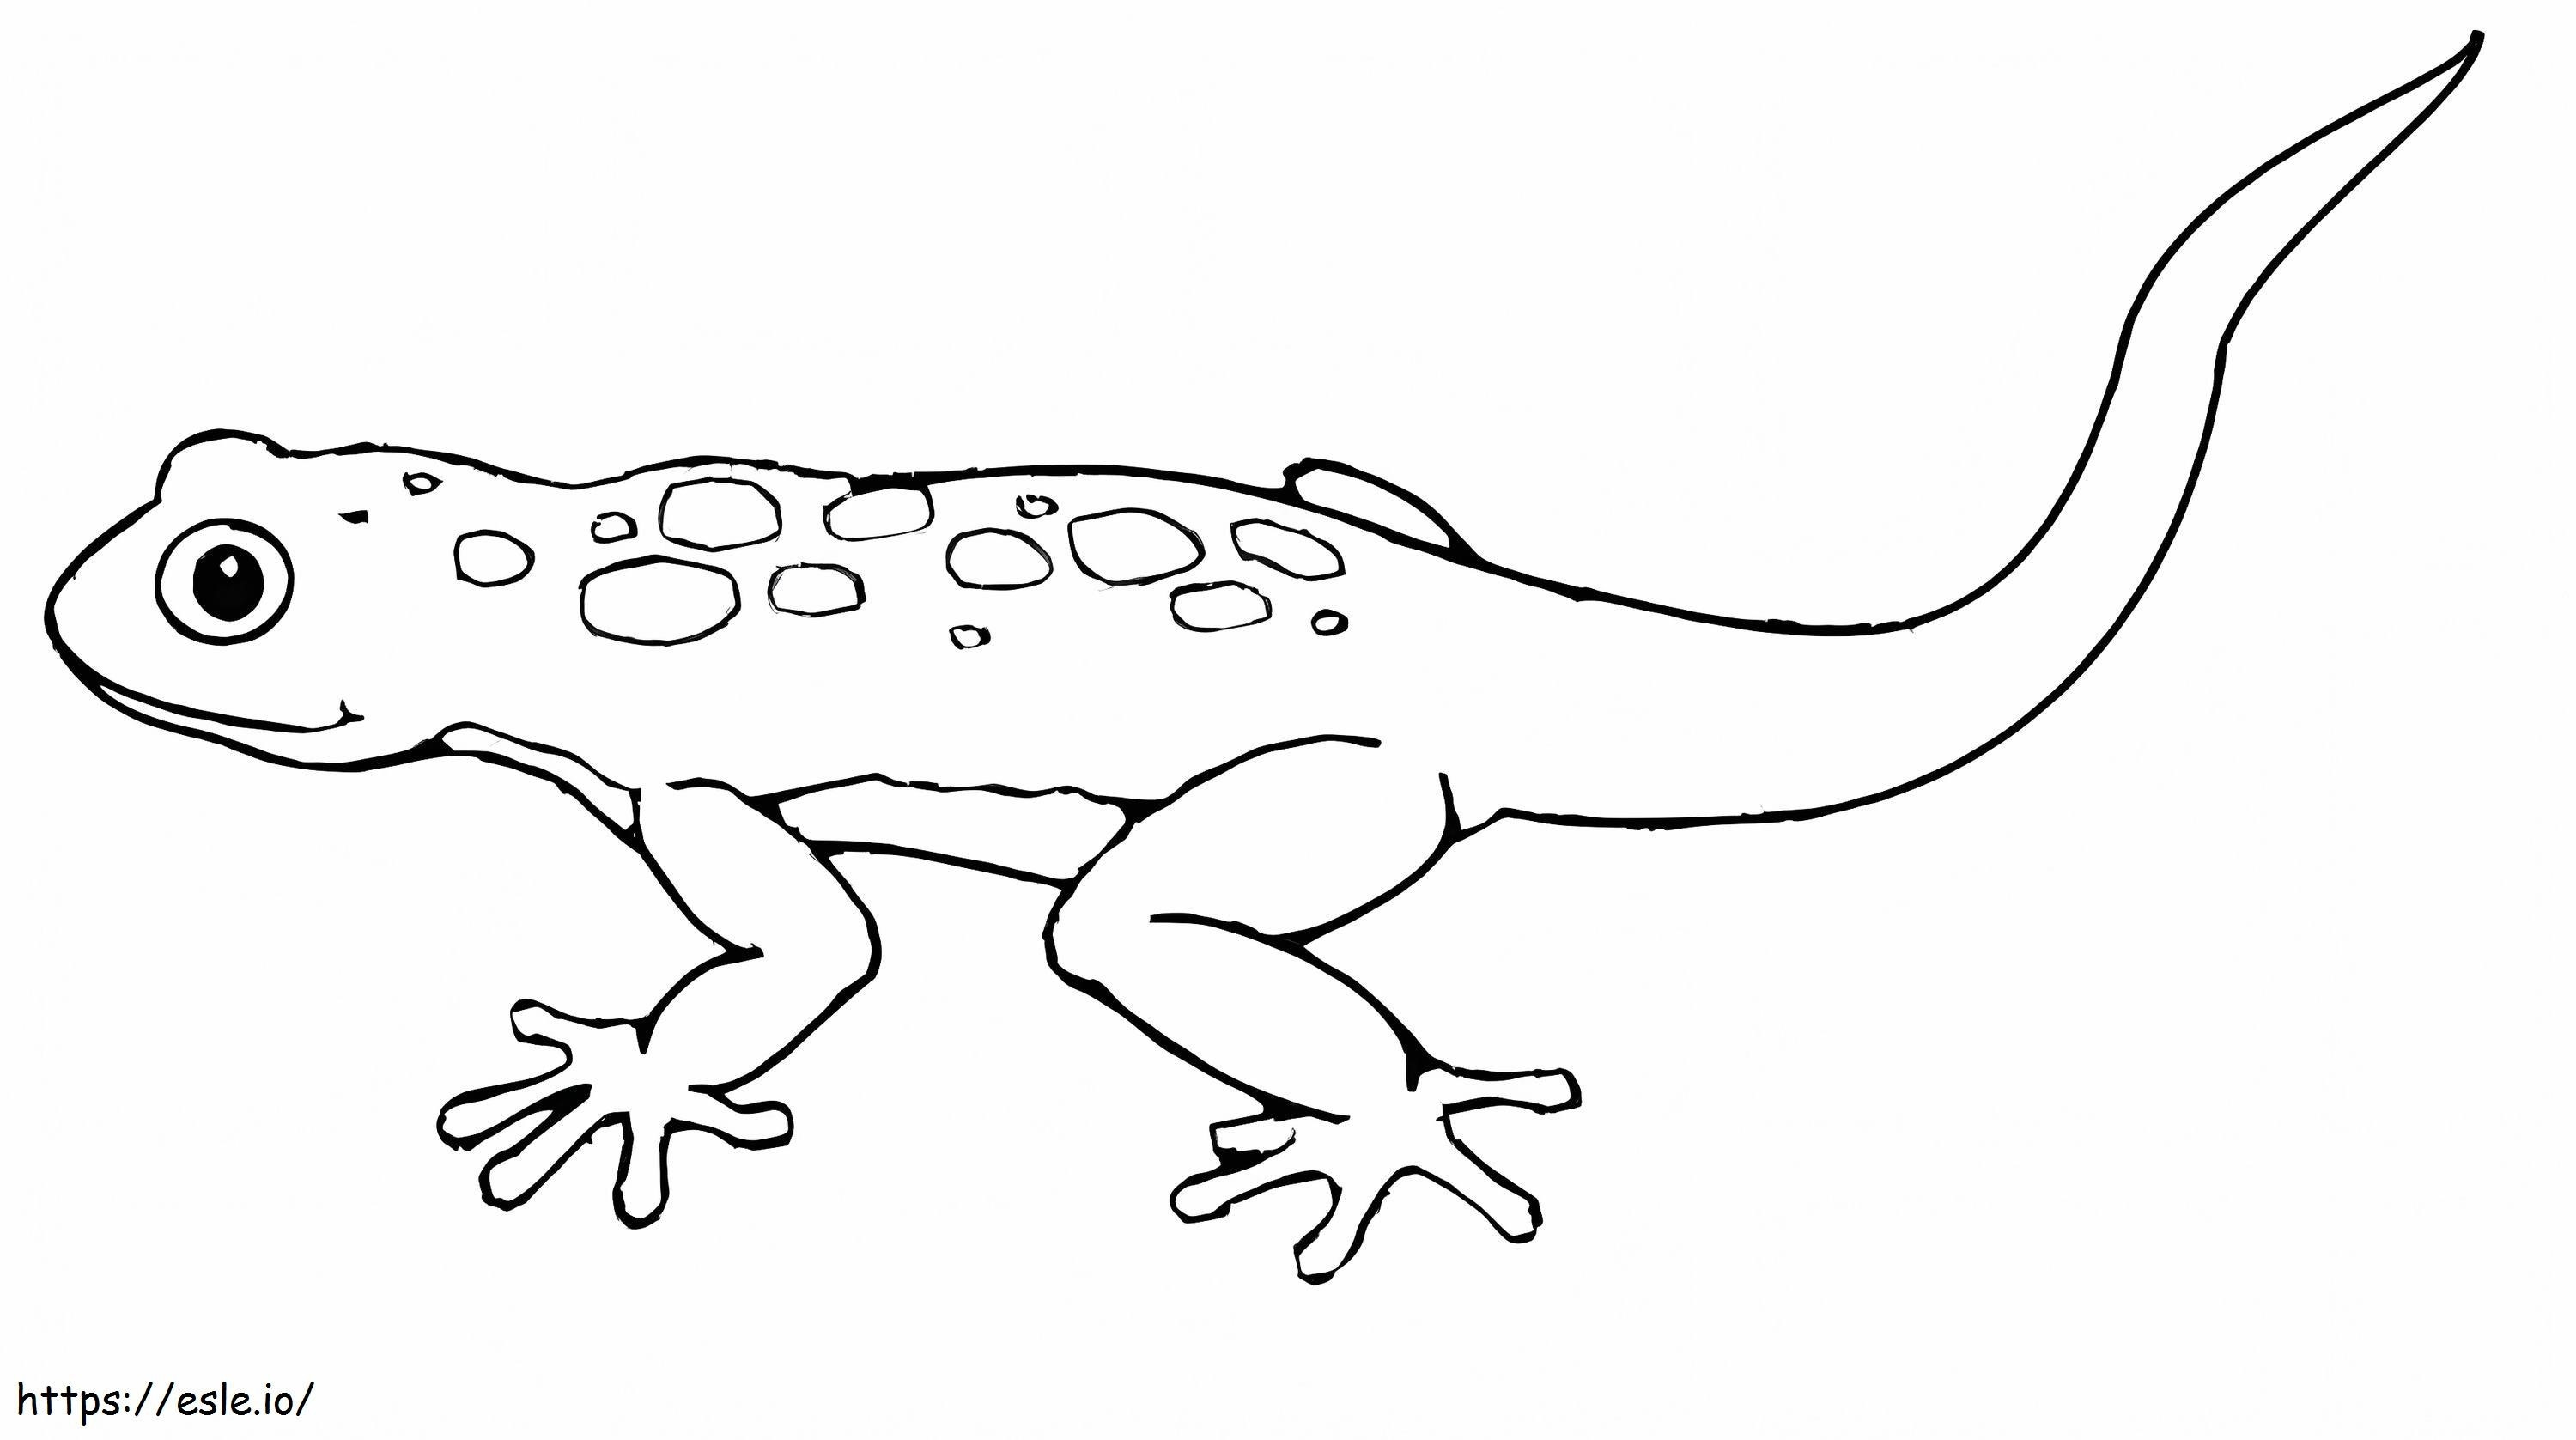 Simple Lizard coloring page